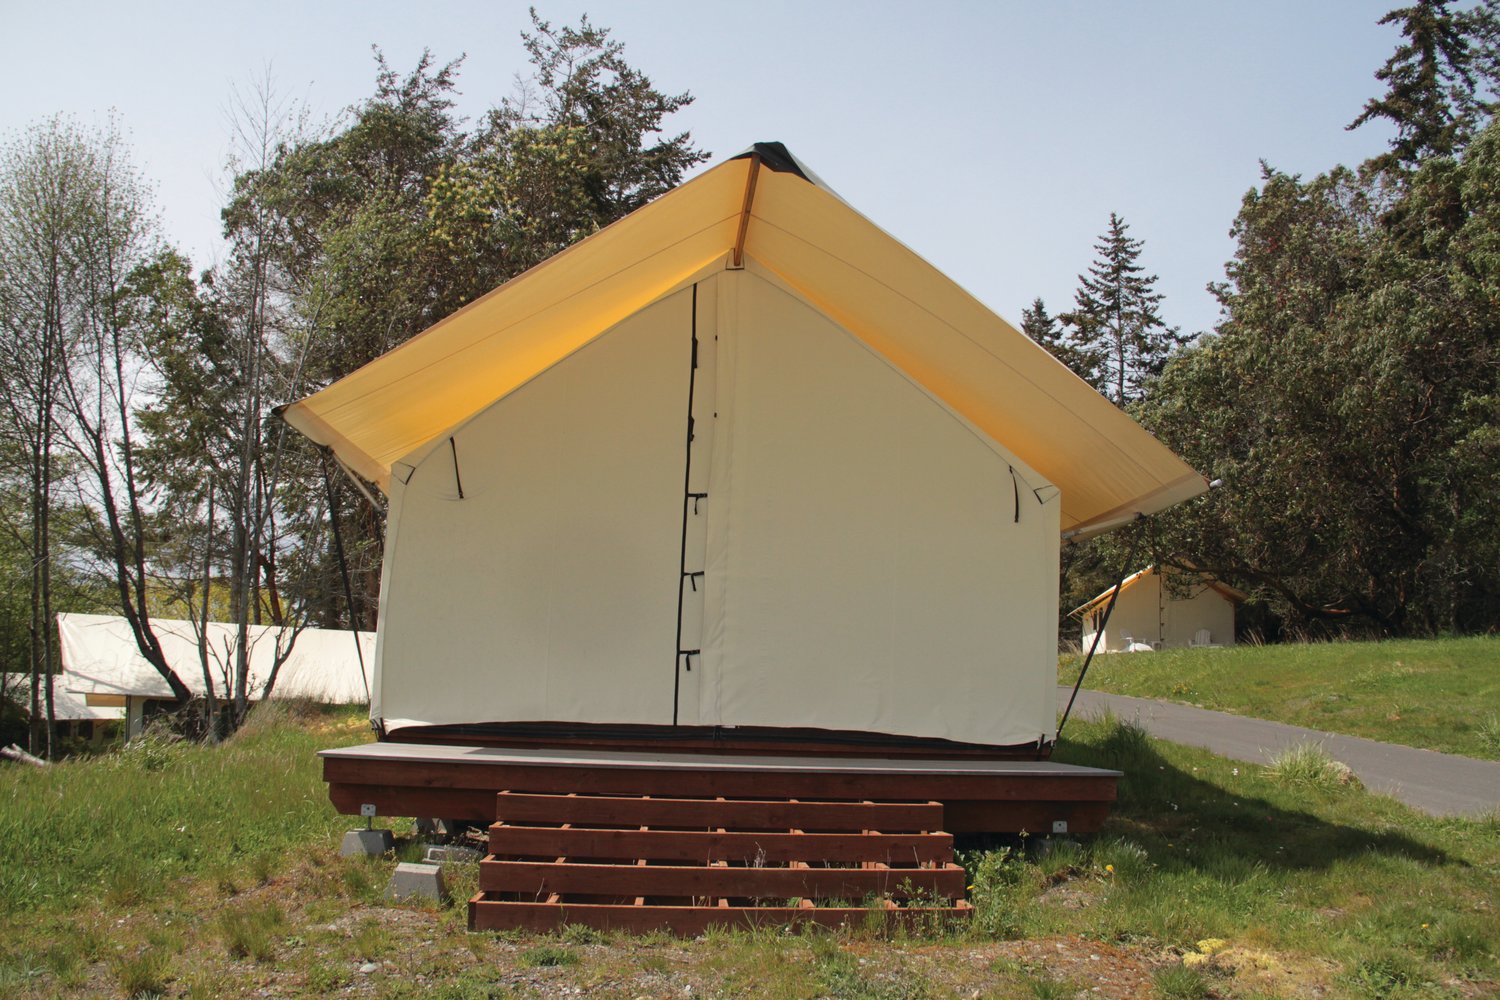 At least $600,000 in improvements is needed to make the glamping tents ready for campers.